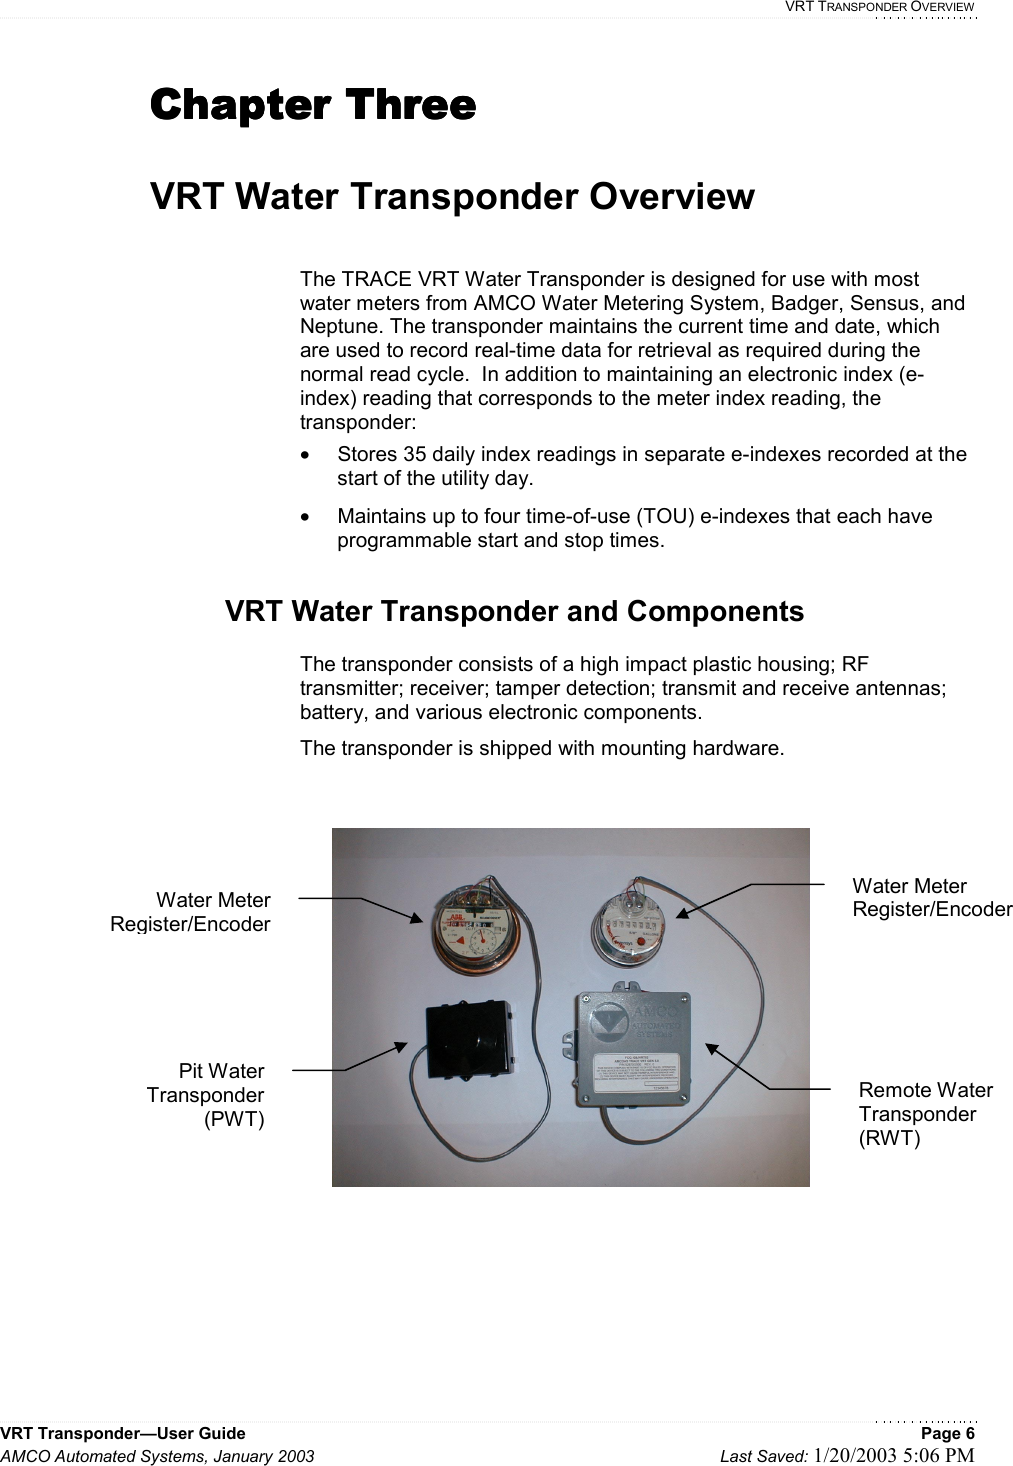   VRT TRANSPONDER OVERVIEW VRT Transponder—User Guide    Page 6 AMCO Automated Systems, January 2003    Last Saved: 1/20/2003 5:06 PM  Chapter ThreeChapter ThreeChapter ThreeChapter Three     VRT Water Transponder Overview  The TRACE VRT Water Transponder is designed for use with most water meters from AMCO Water Metering System, Badger, Sensus, and Neptune. The transponder maintains the current time and date, which are used to record real-time data for retrieval as required during the normal read cycle.  In addition to maintaining an electronic index (e-index) reading that corresponds to the meter index reading, the transponder: •  Stores 35 daily index readings in separate e-indexes recorded at the start of the utility day. •  Maintains up to four time-of-use (TOU) e-indexes that each have programmable start and stop times.  VRT Water Transponder and Components  The transponder consists of a high impact plastic housing; RF transmitter; receiver; tamper detection; transmit and receive antennas; battery, and various electronic components.   The transponder is shipped with mounting hardware.    Pit Water Transponder (PWT) Water Meter Register/Encoder Remote Water Transponder (RWT) Water Meter Register/Encoder 